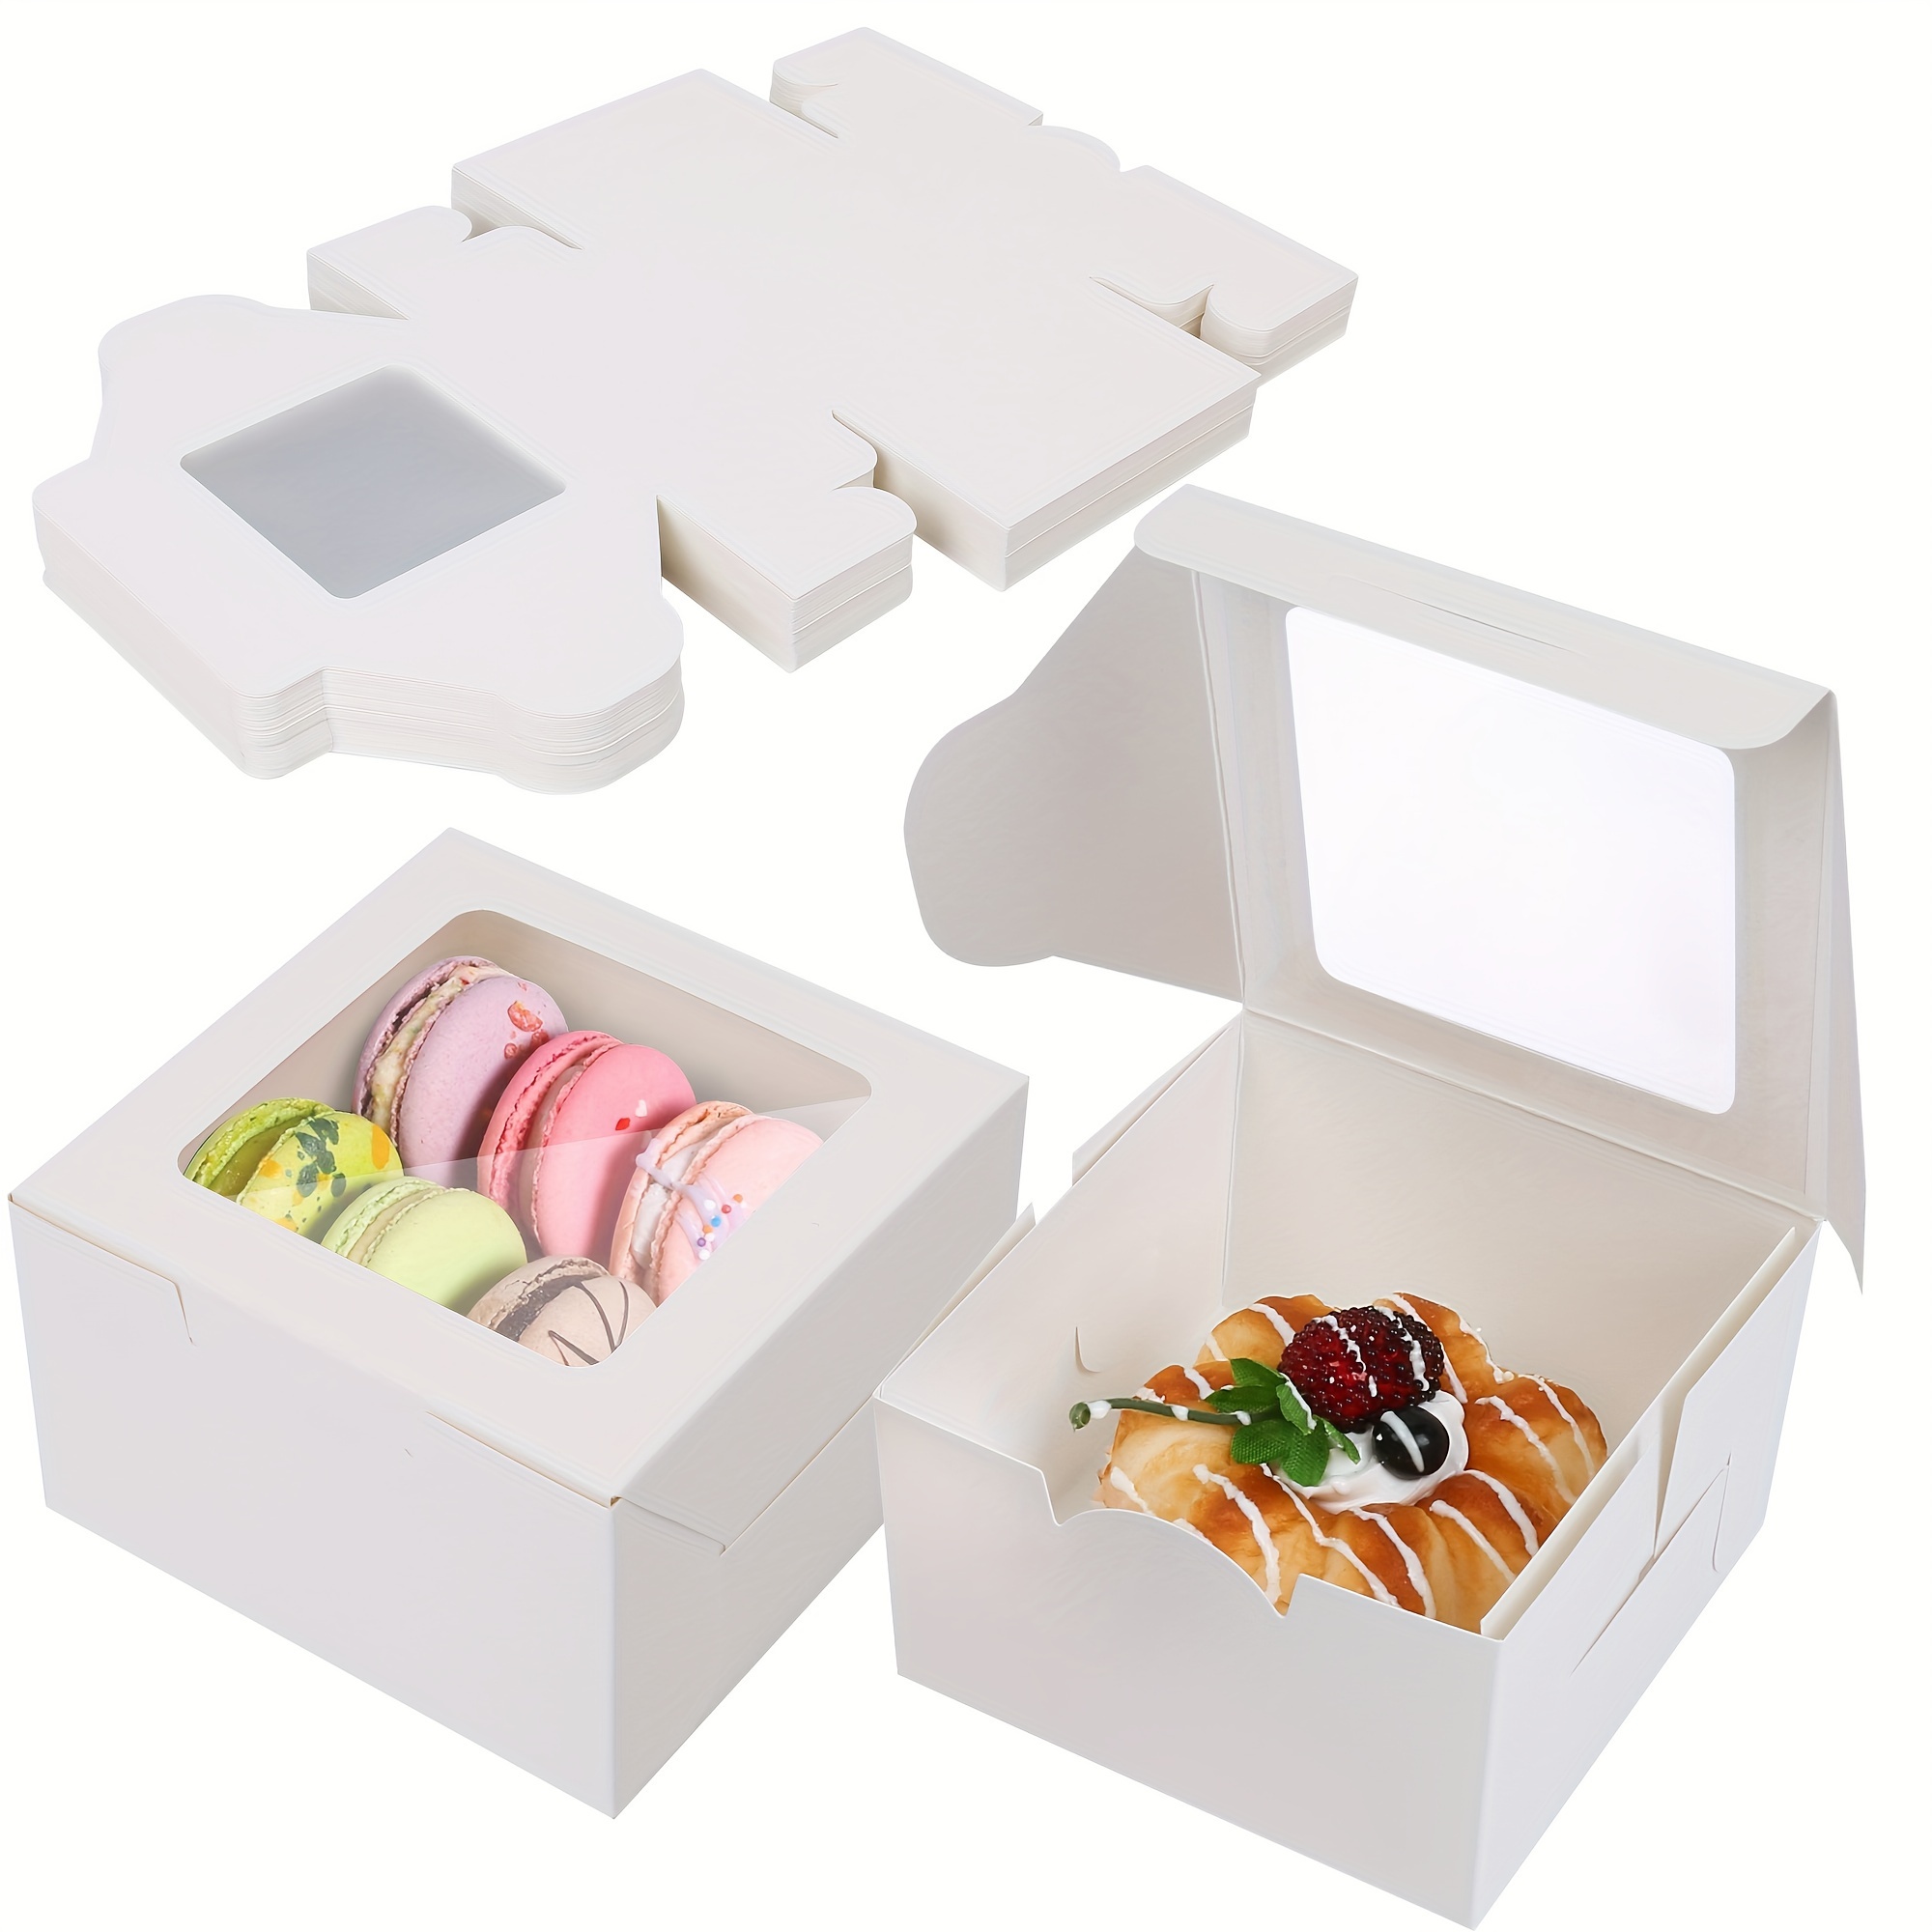 

Lotfancy White Bakery Boxes With Window, 60 Pcs, 4x4x2.5 Inches, Cookie Boxes, Small Treat Boxes, Mini Cake Boxes For Dessert, Macarons, Chocolates, Pastry And Baked Goods